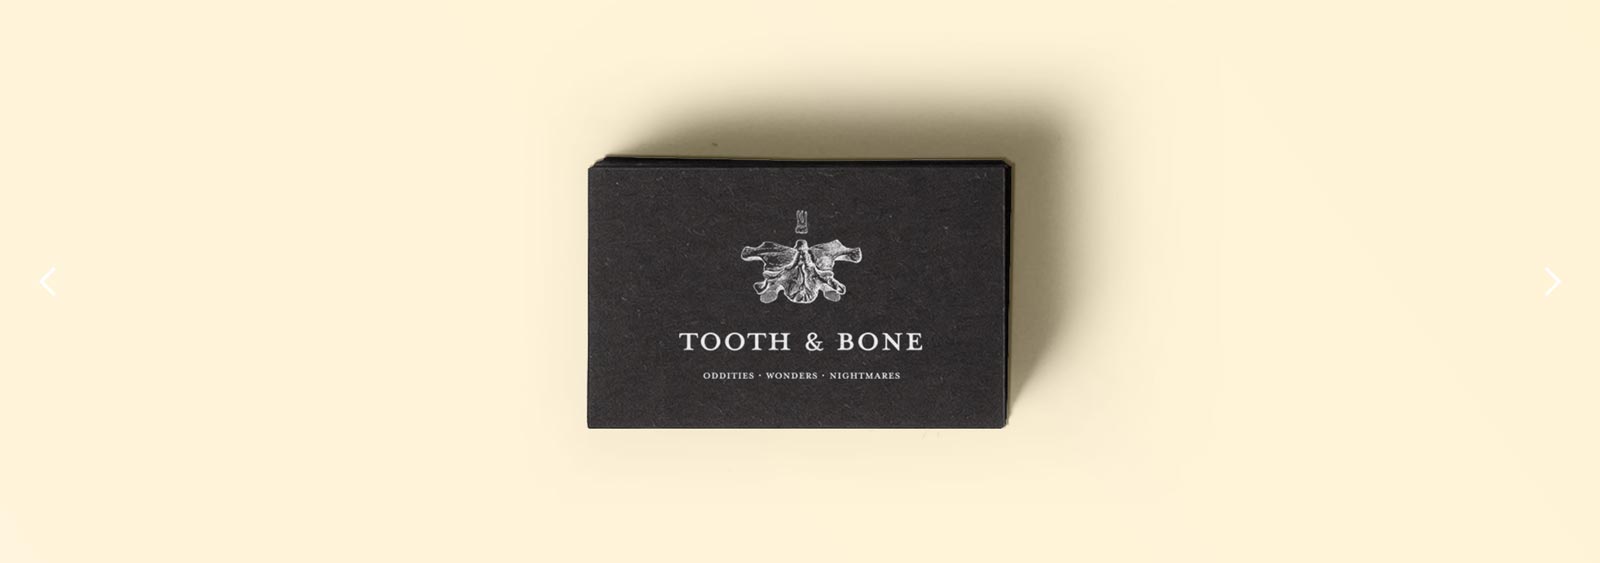 Tooth & Bone brand design by Noisy Ghost Co.